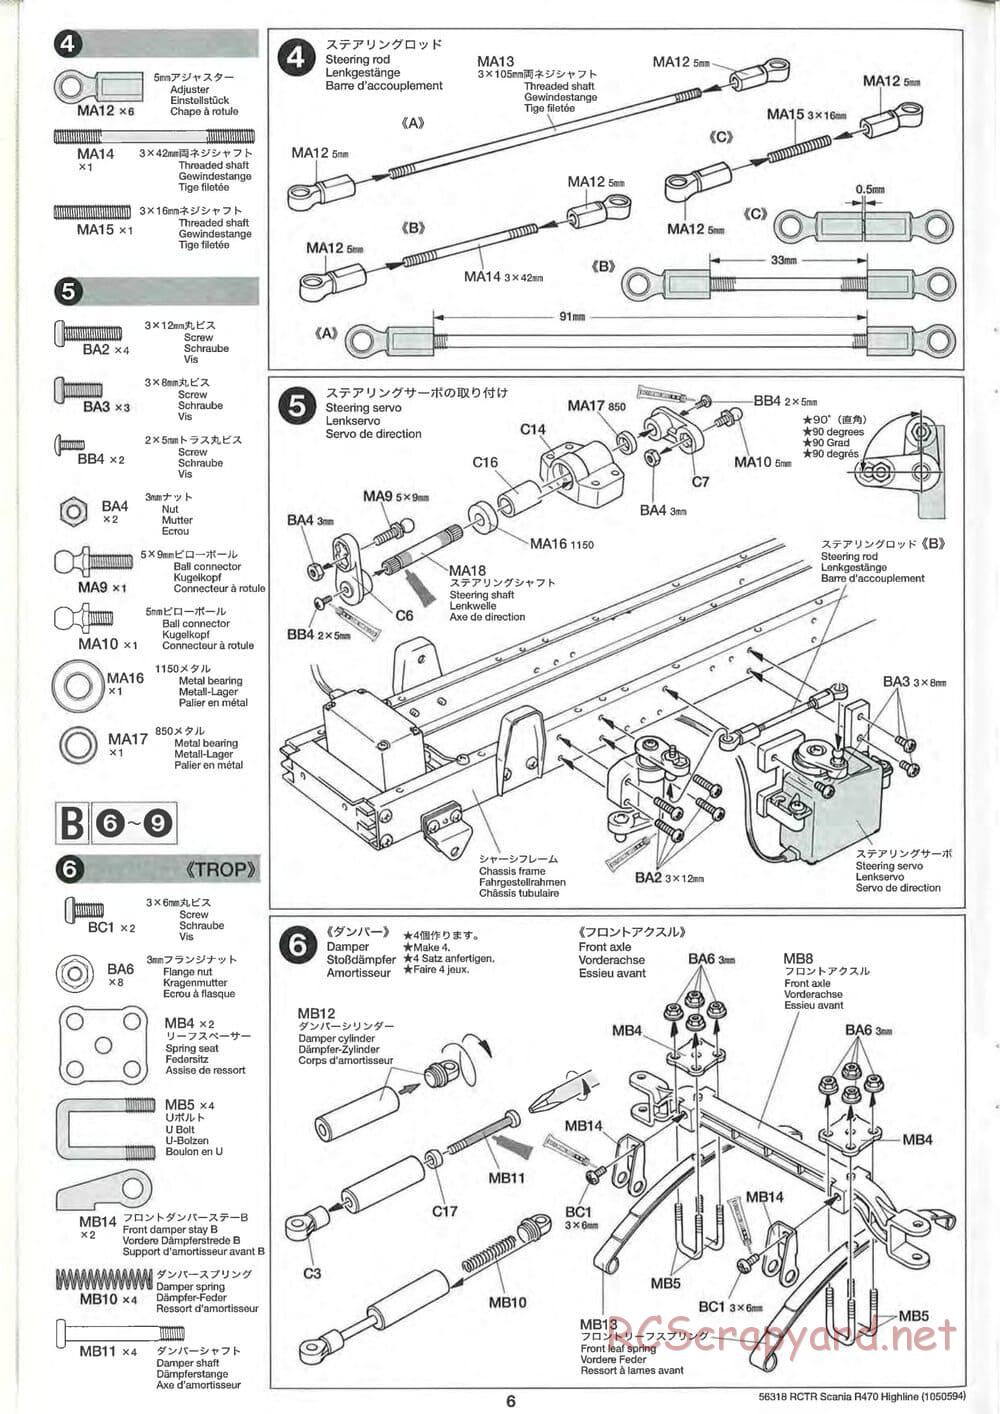 Tamiya - Scania R470 Highline Tractor Truck Chassis - Manual - Page 6